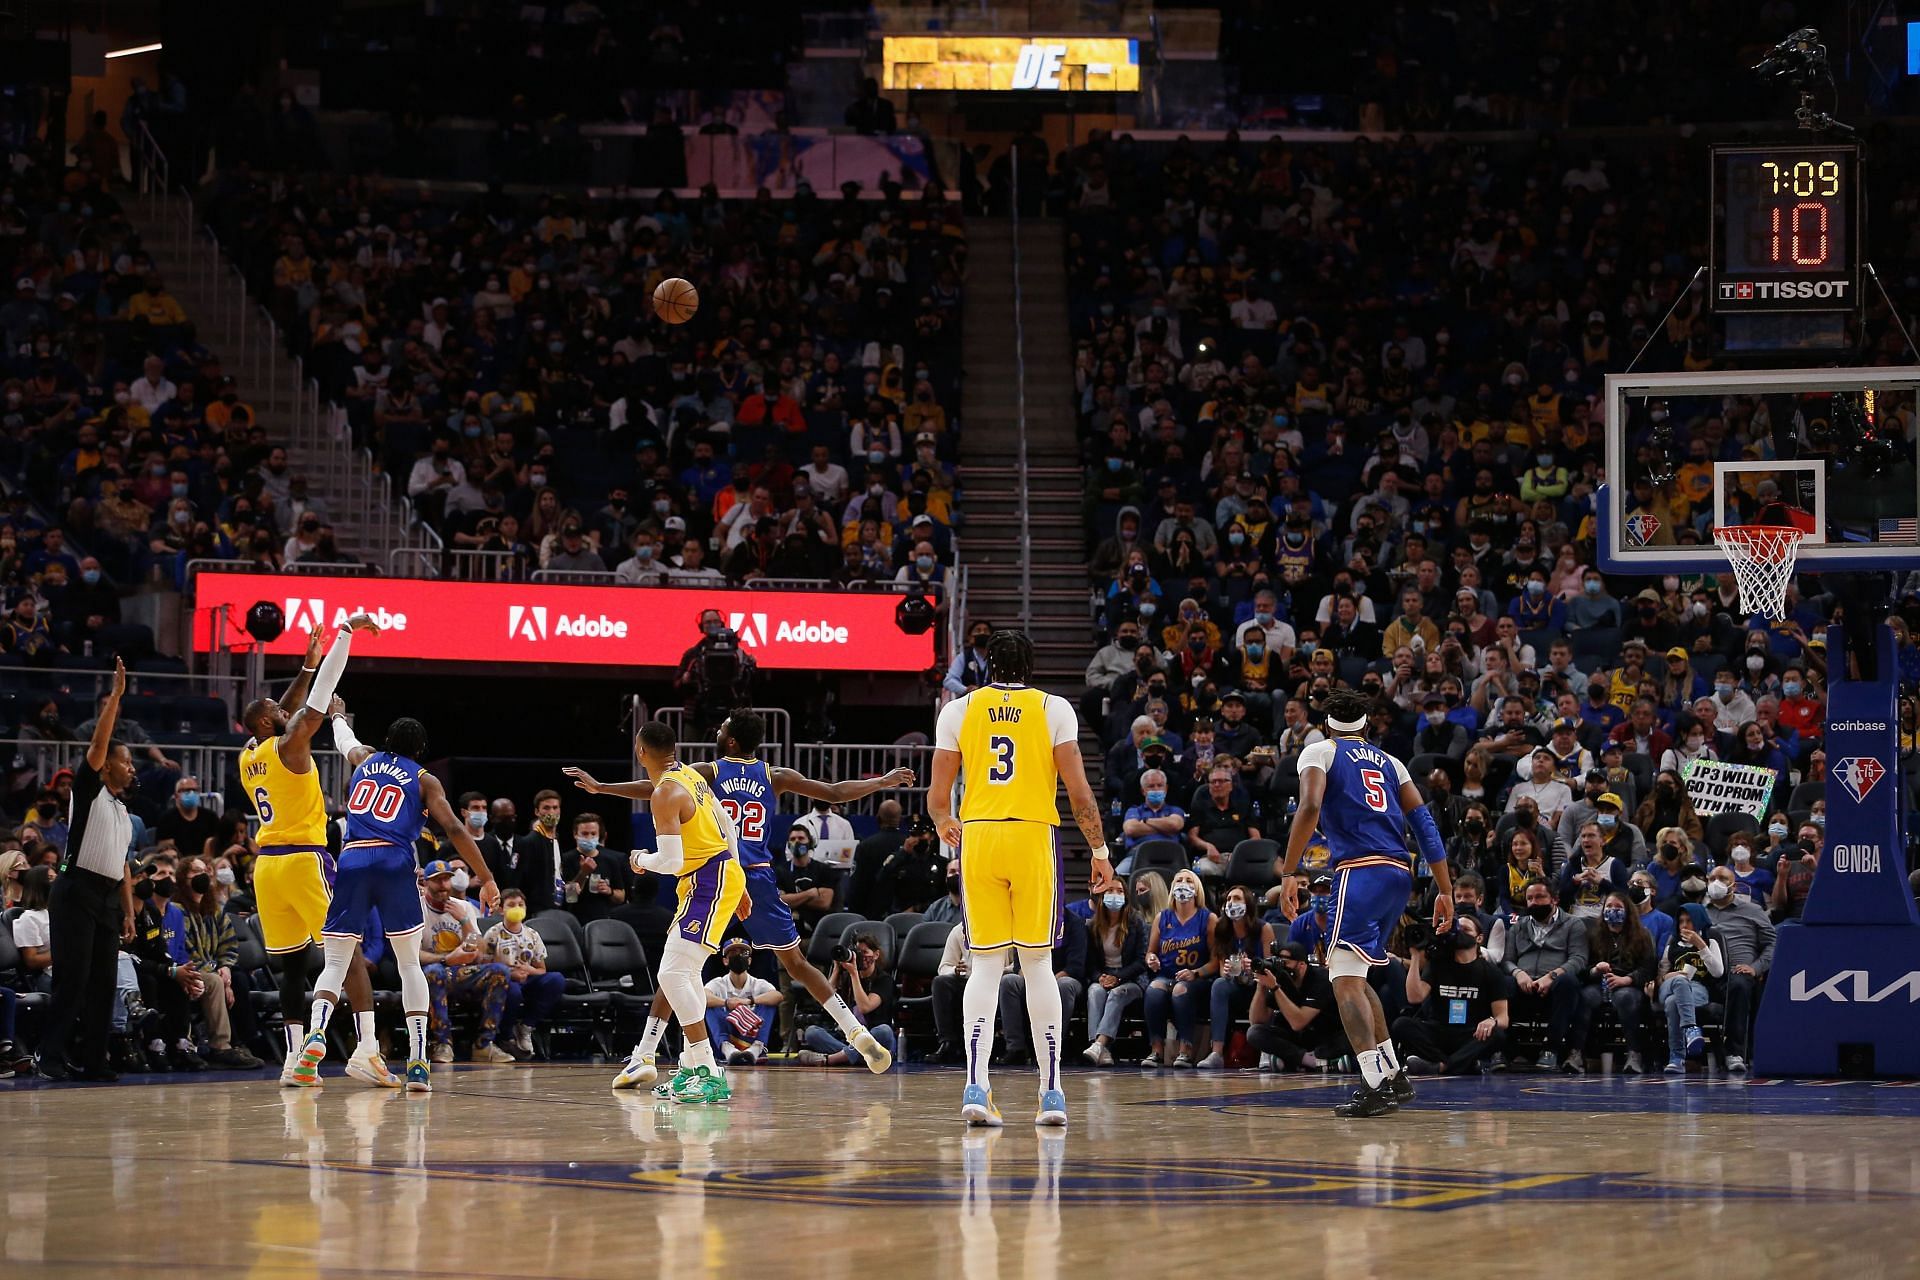 “The Lakers did not look... like they believed they belonged on that ...